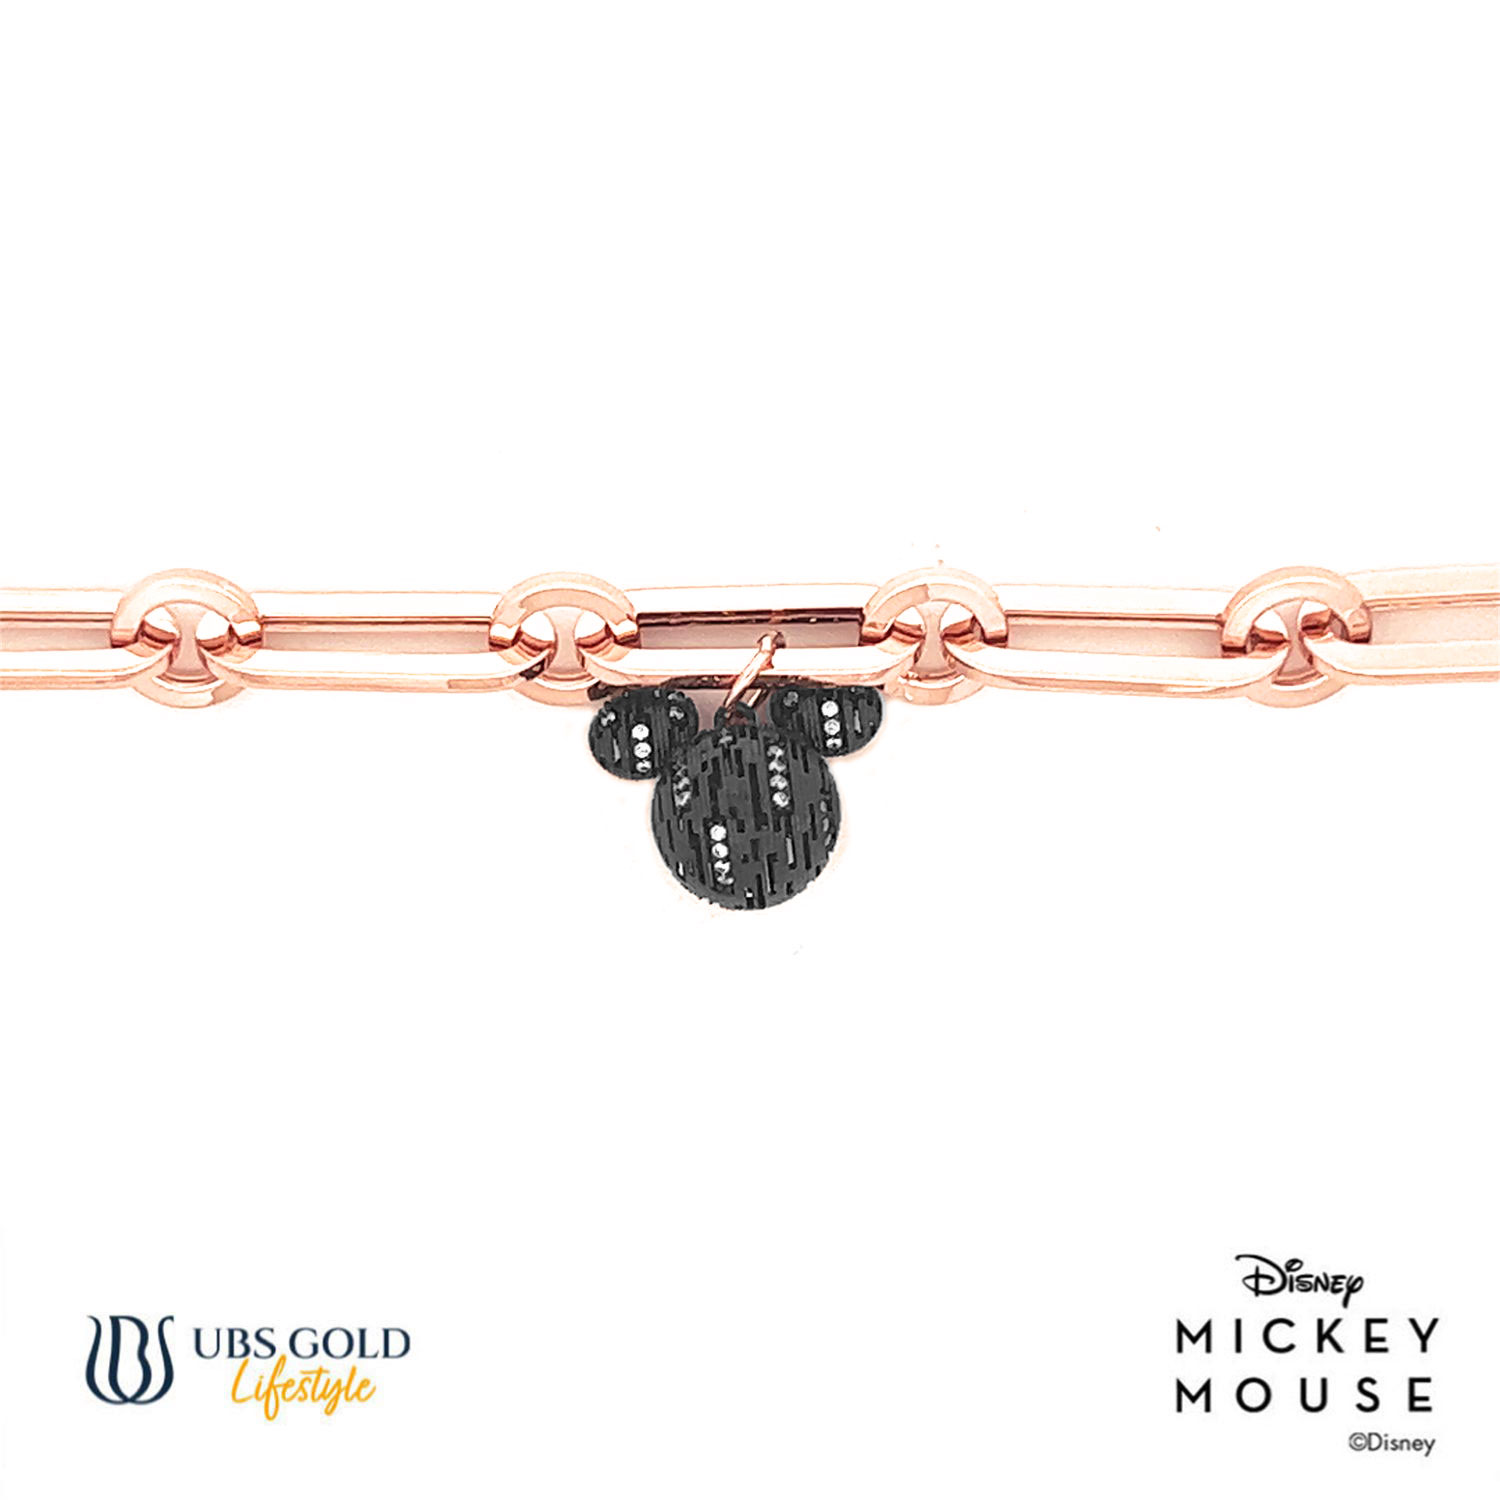 UBS Gold Gelang Emas Disney Mickey Mouse - Hgy0162 - 17K